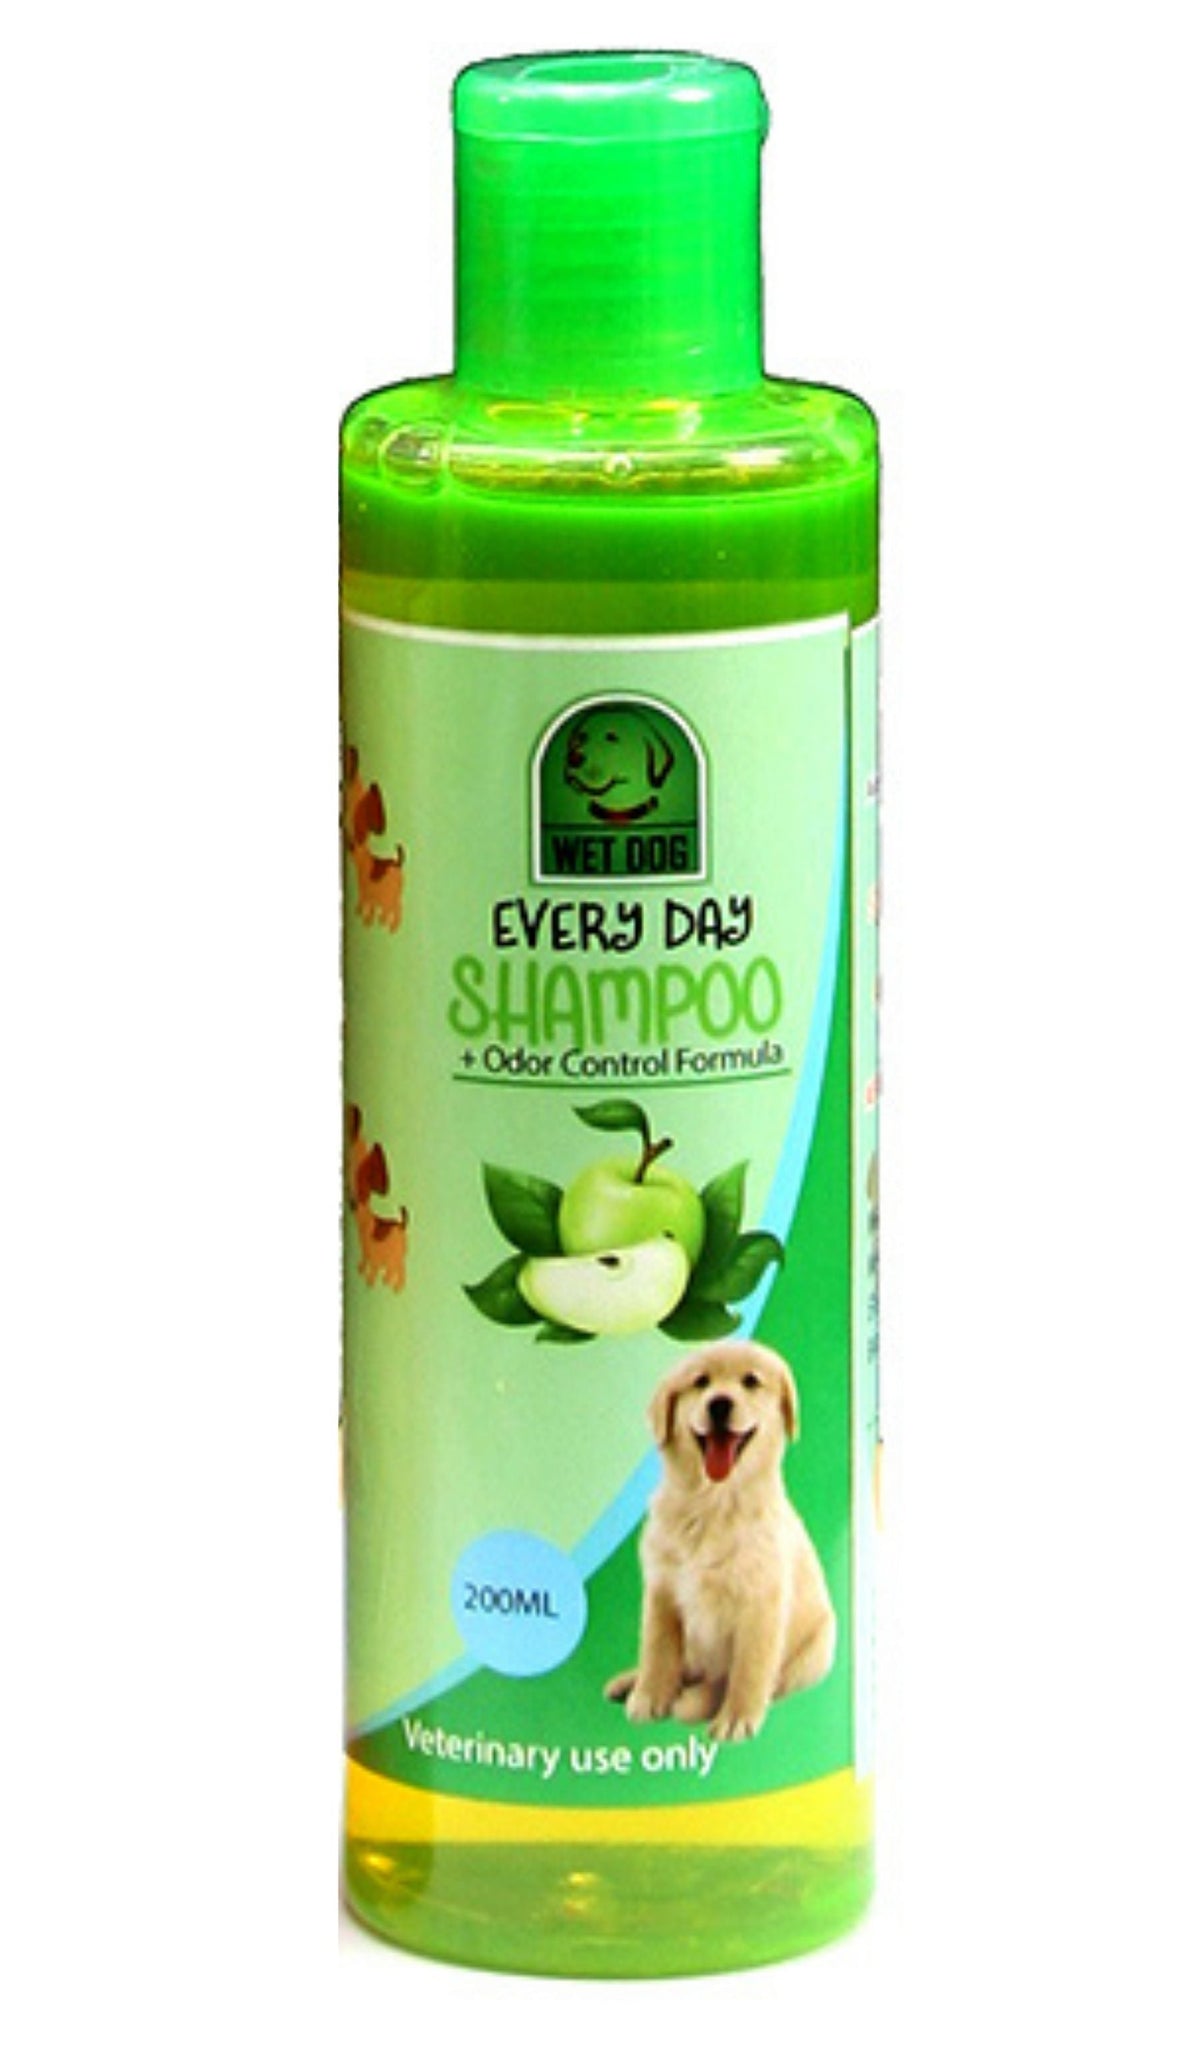 Wet Dog Every Day Apple Scented Shampoo petbay.lk